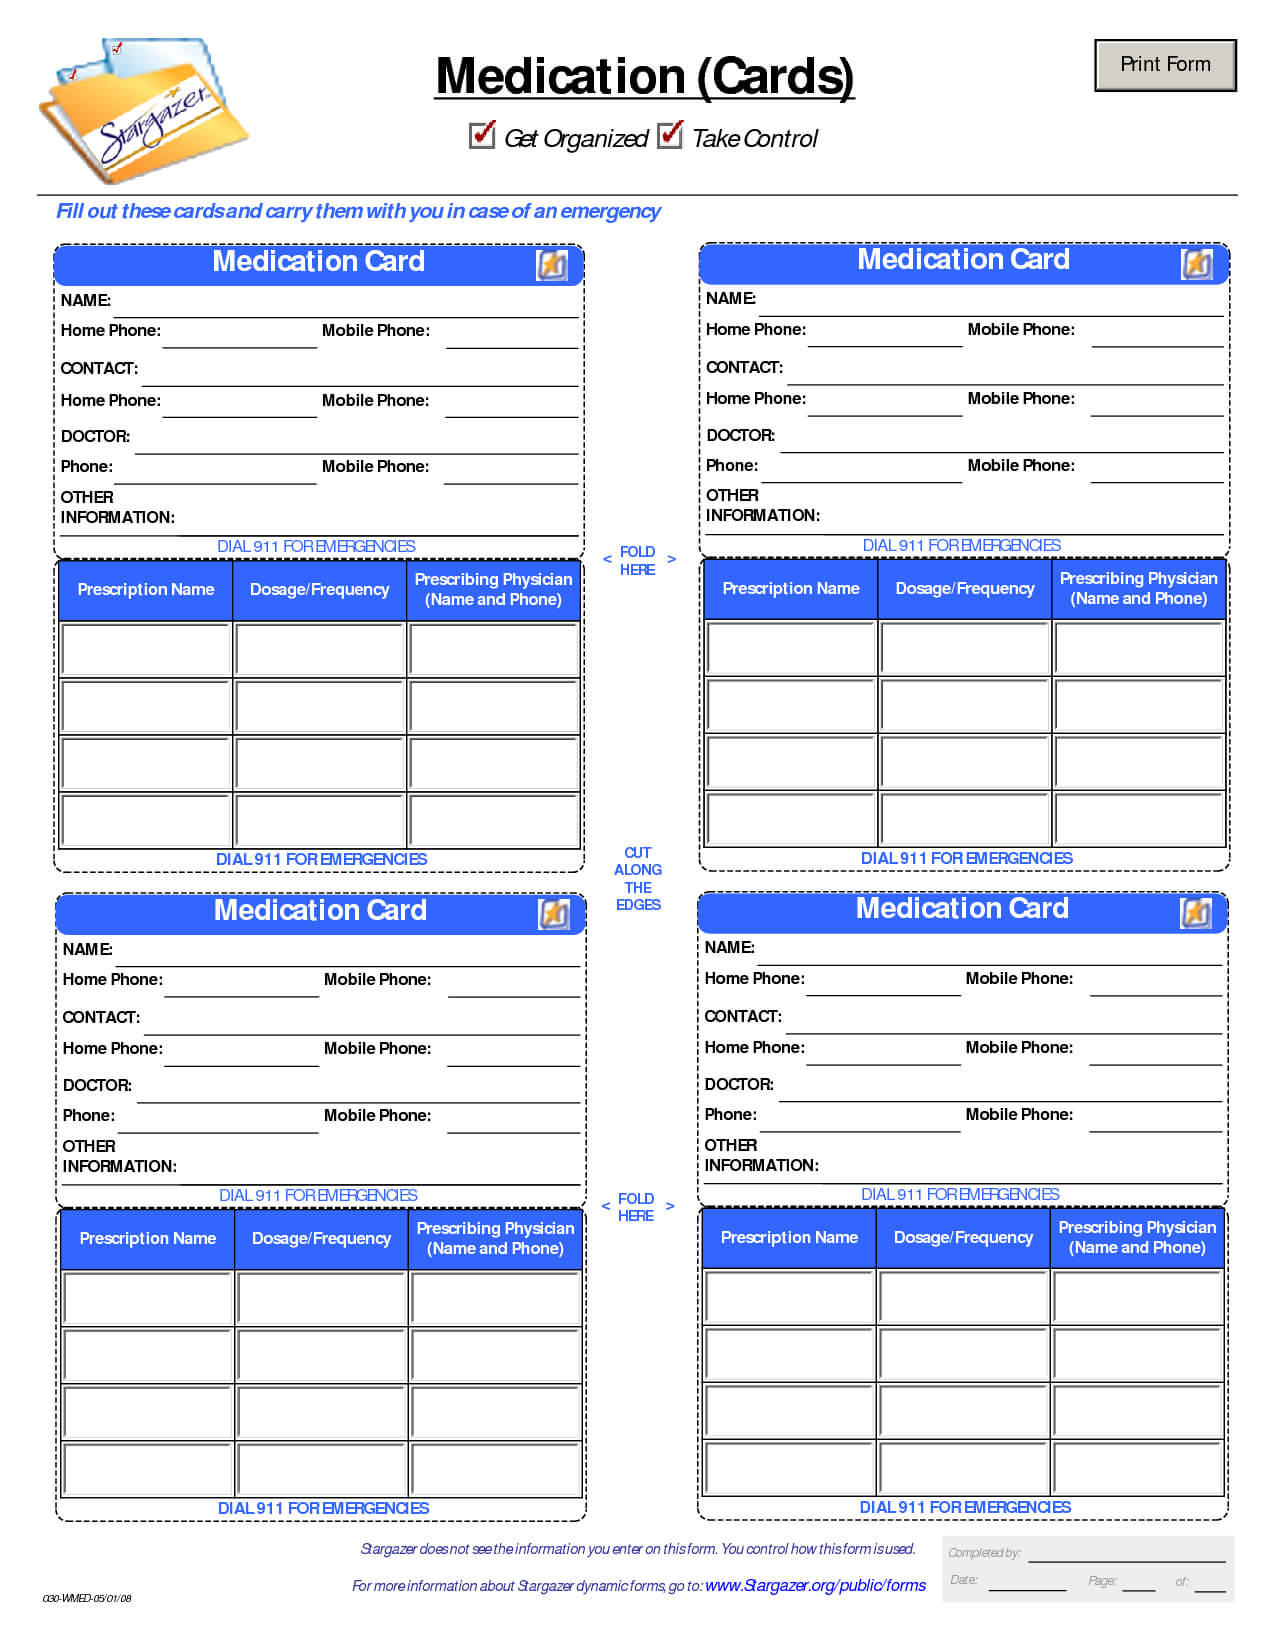 Patient Medication Card Template | Medication List, Medical Within Med Card Template